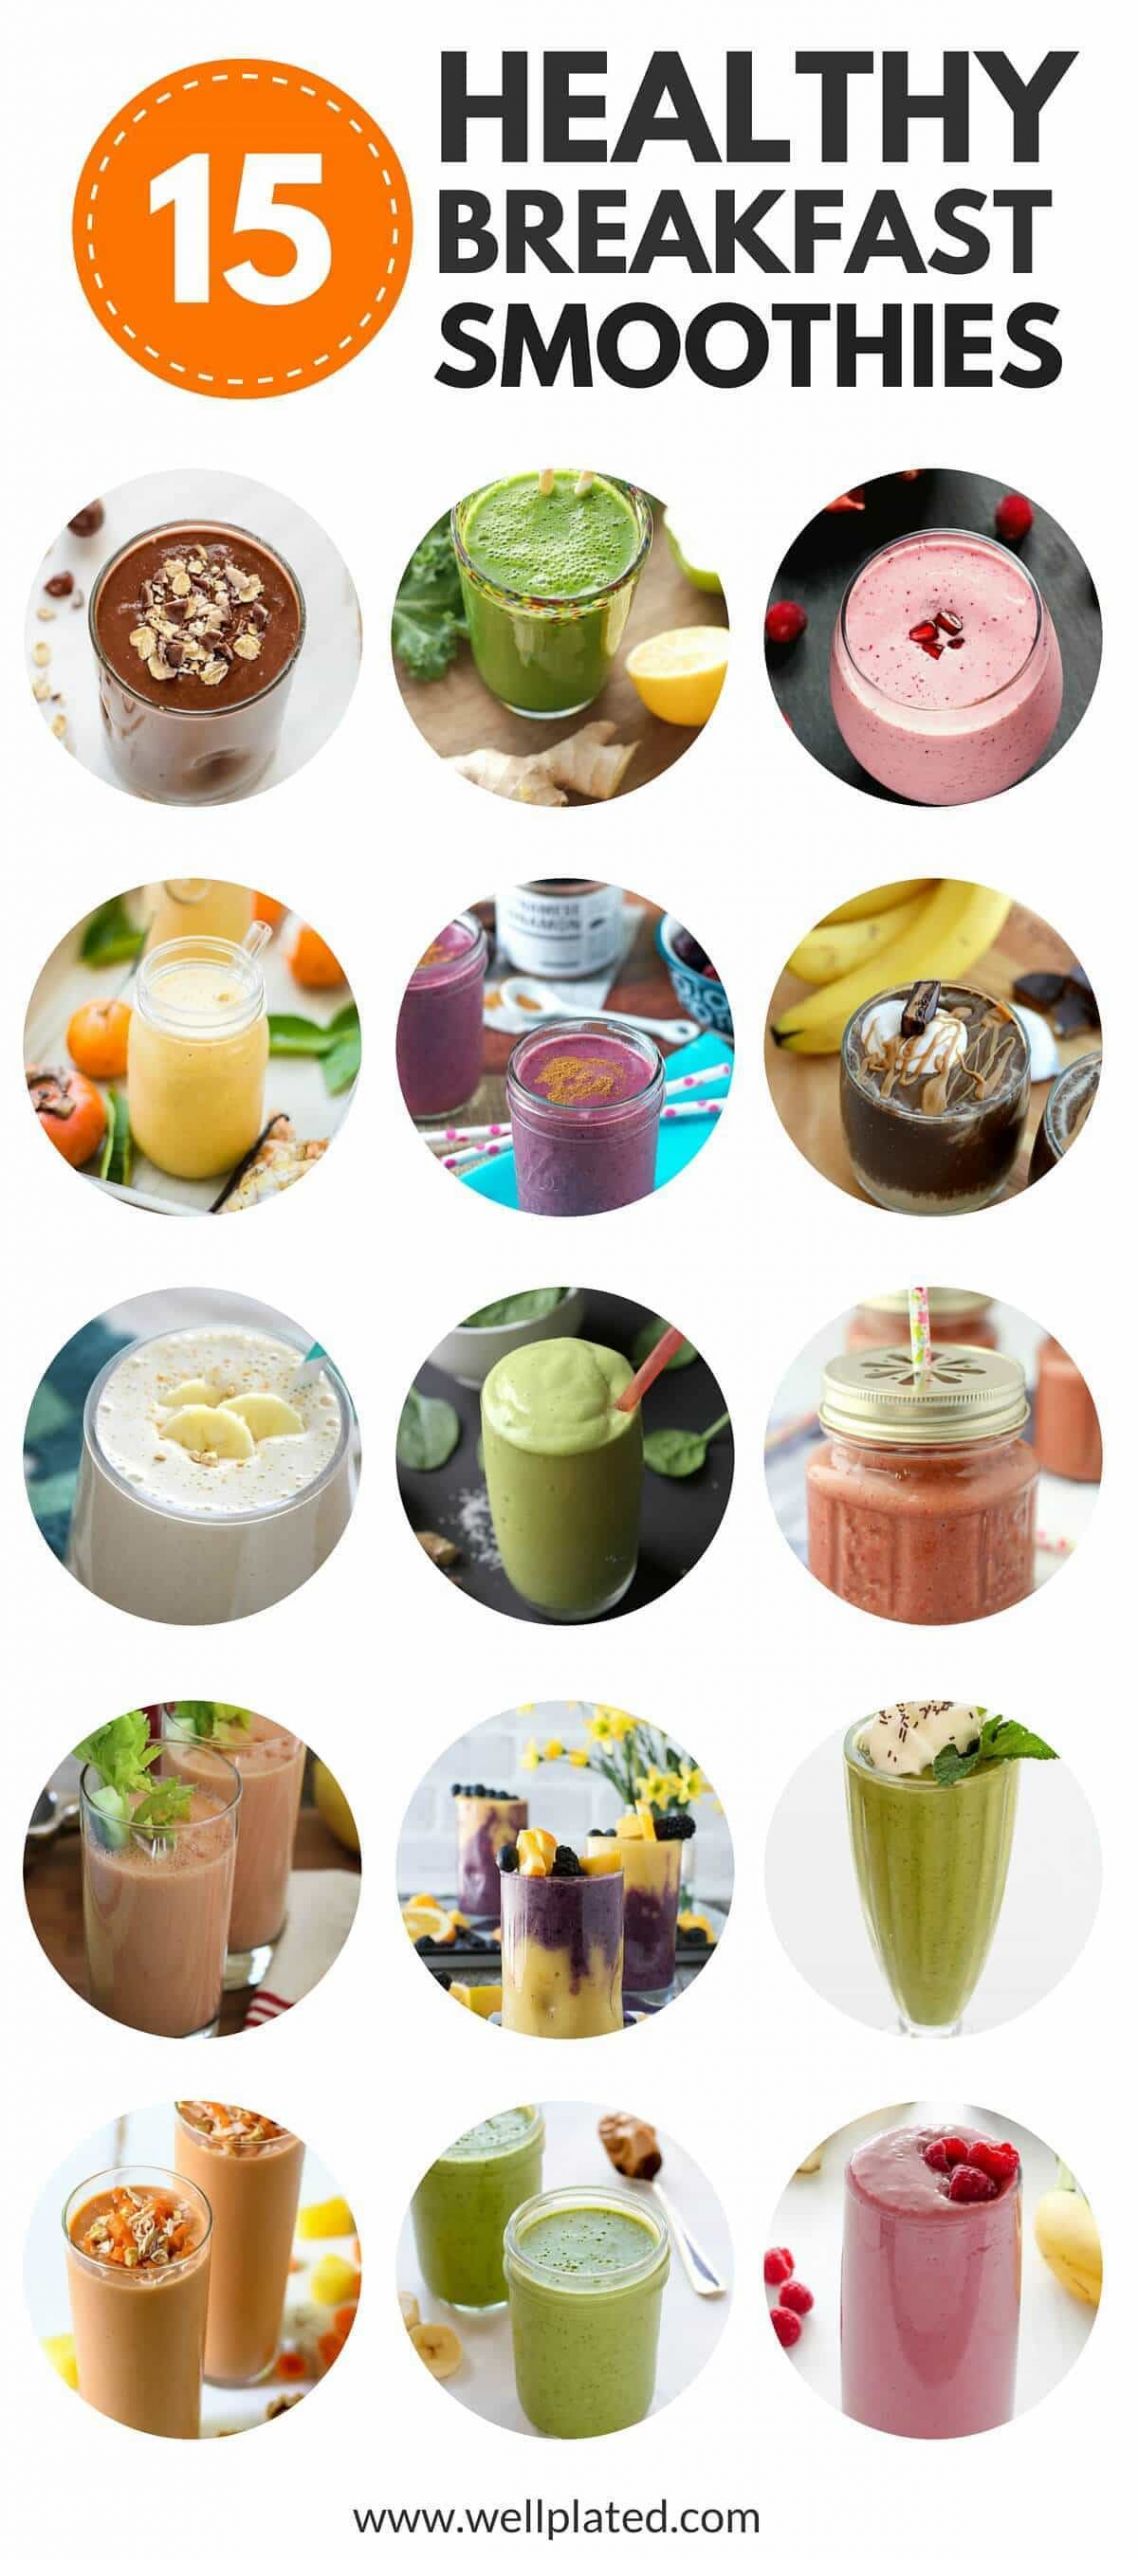 Healthy Breakfast Meals To Lose Weight
 The Best 15 Healthy Breakfast Smoothies